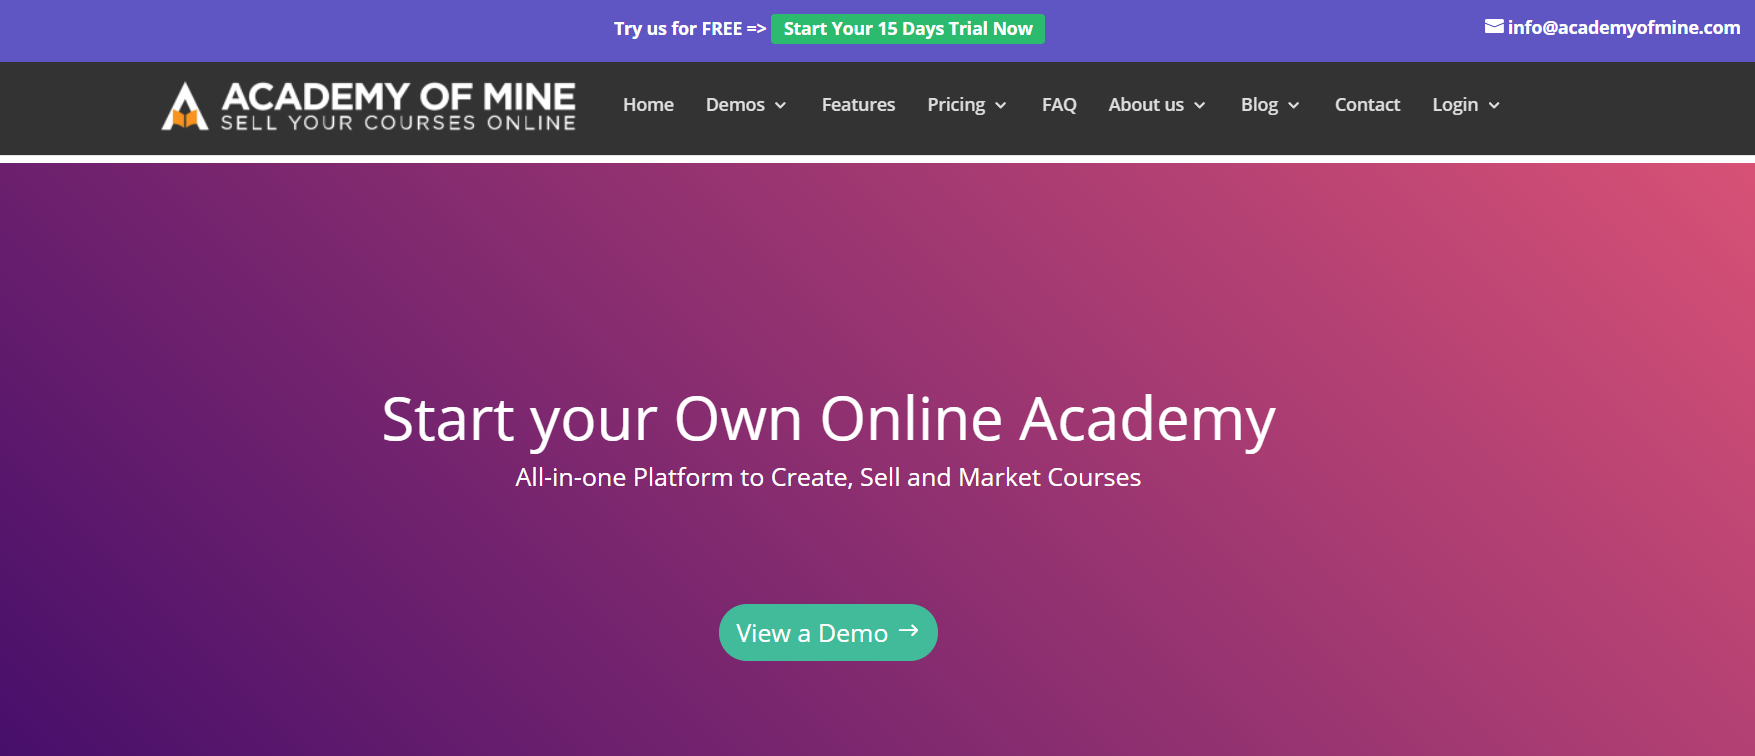 Academy Of Mine Review- How to Sell Courses Online 